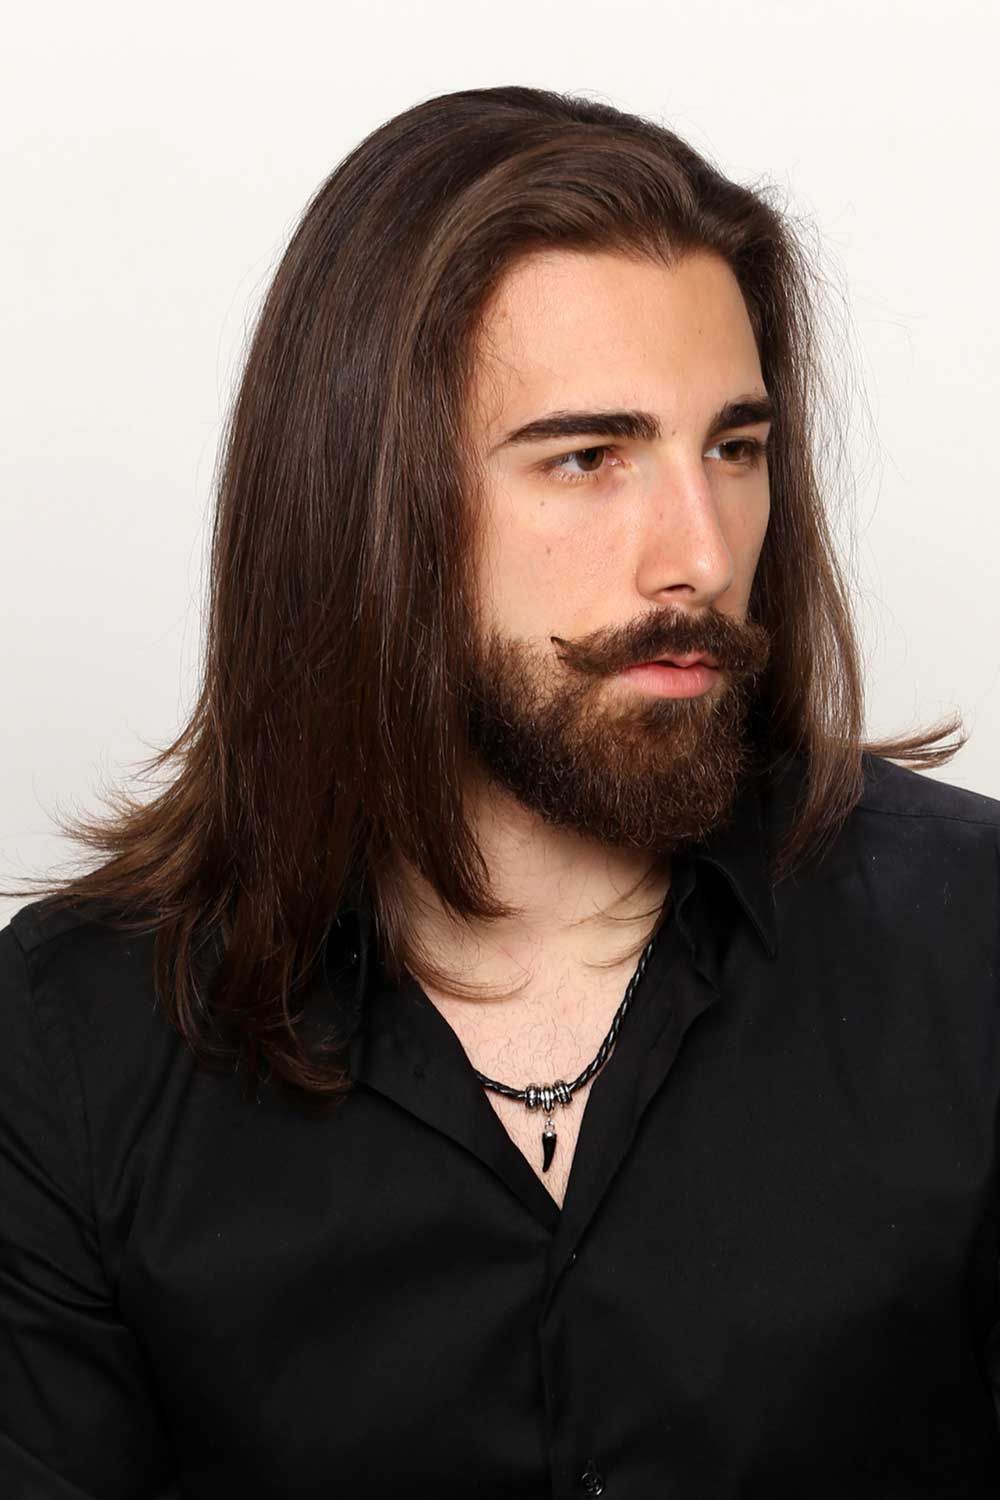 Long Hairstyle for Men 8 Classic long hairstyles male | Long Hairstyles for Men | Long hairstyles for men with thin hair Long Hairstyles for Men